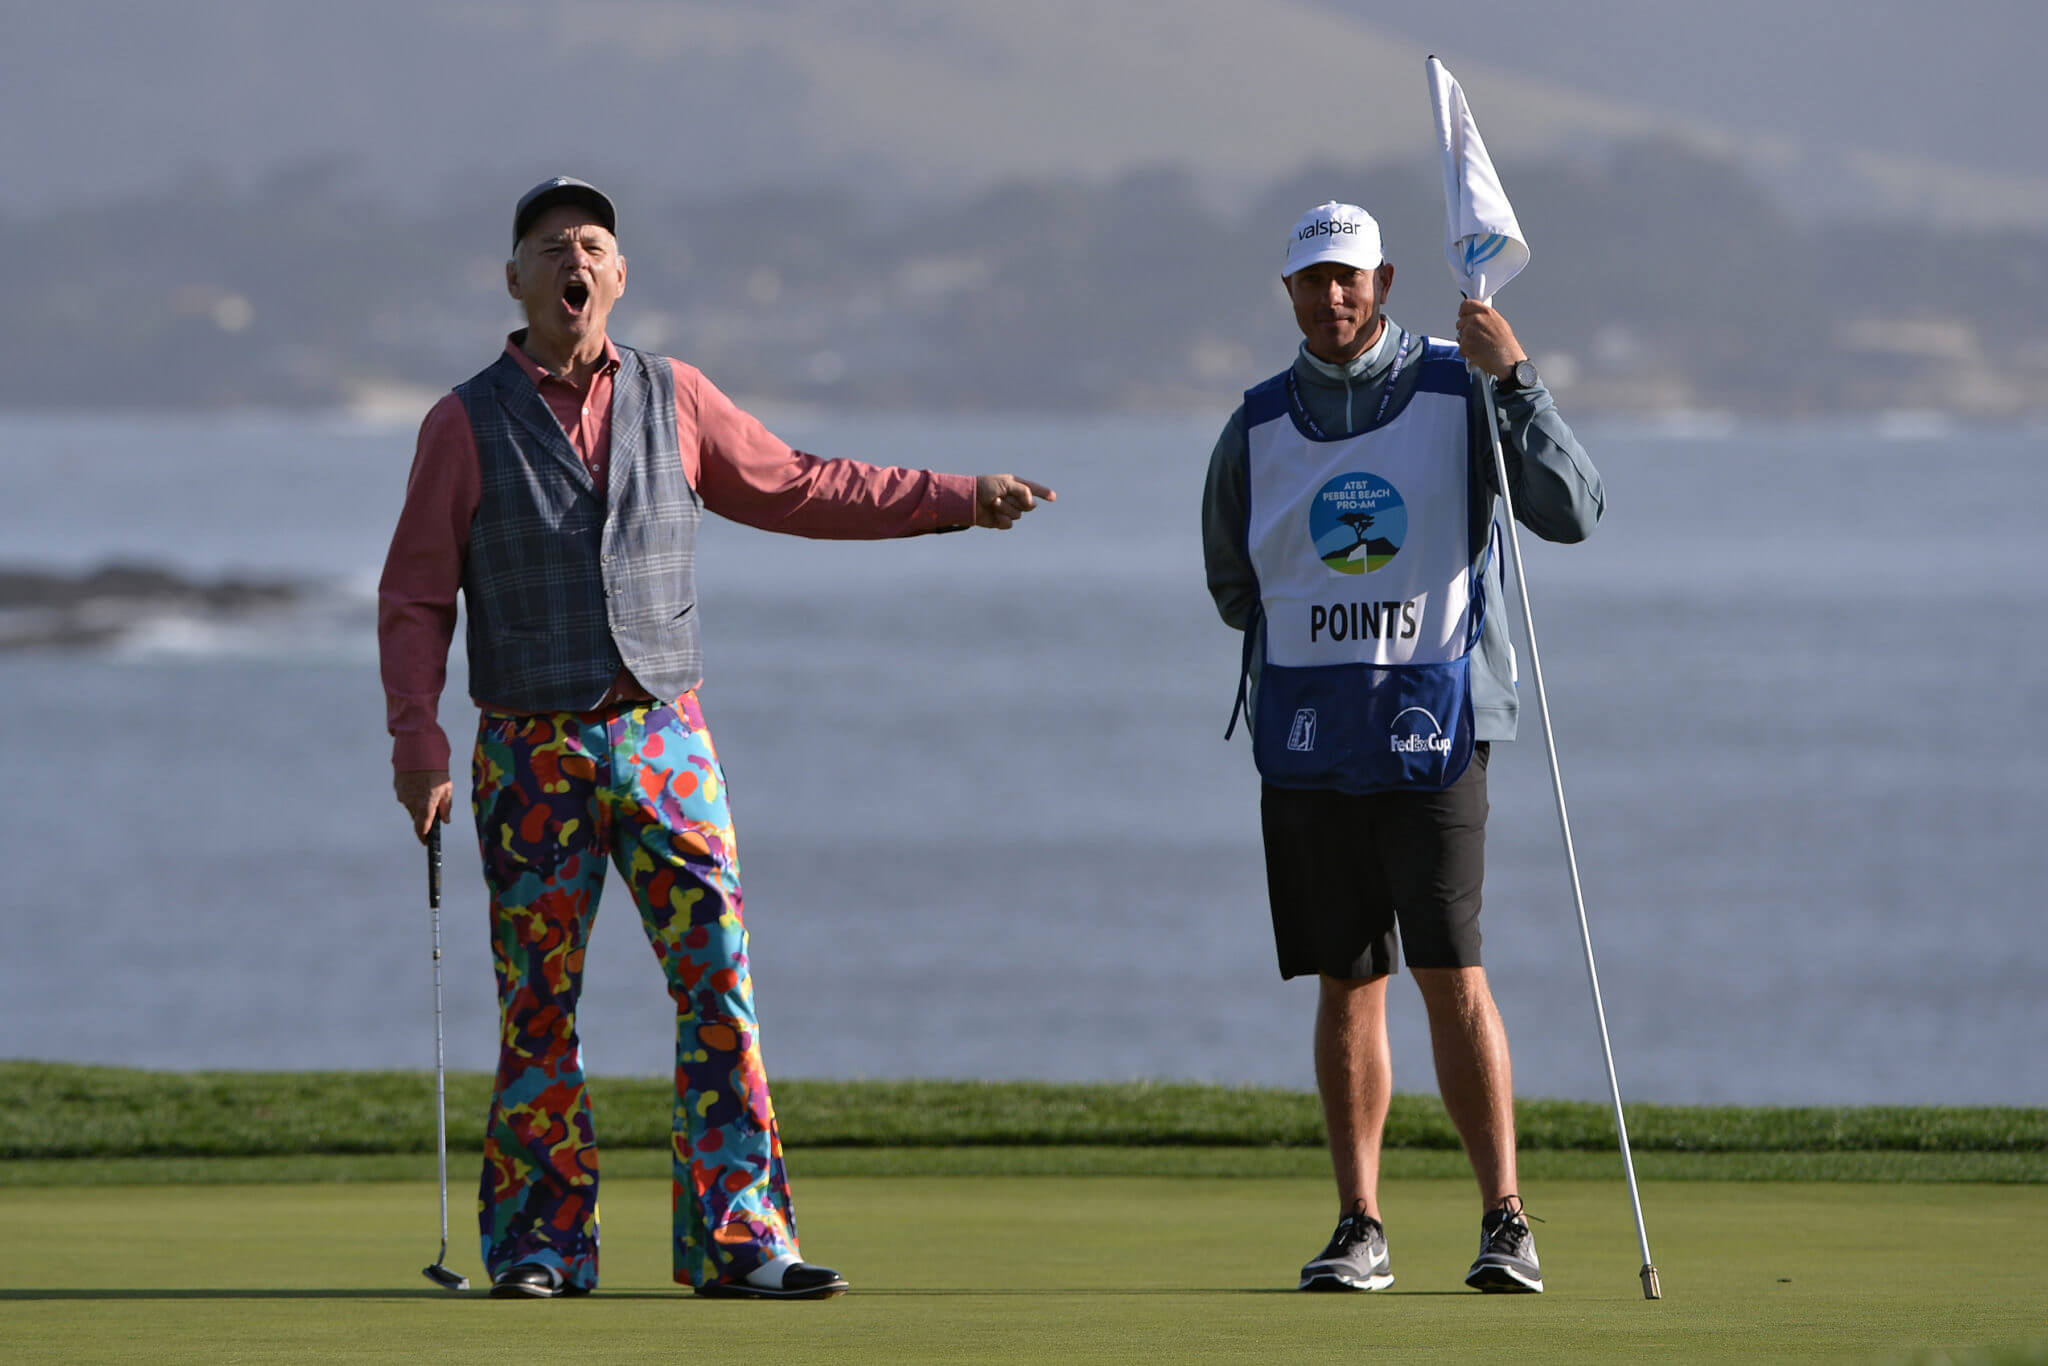 A Good Walk Unsoiled A caddie's guide to the dos and don'ts of a pro